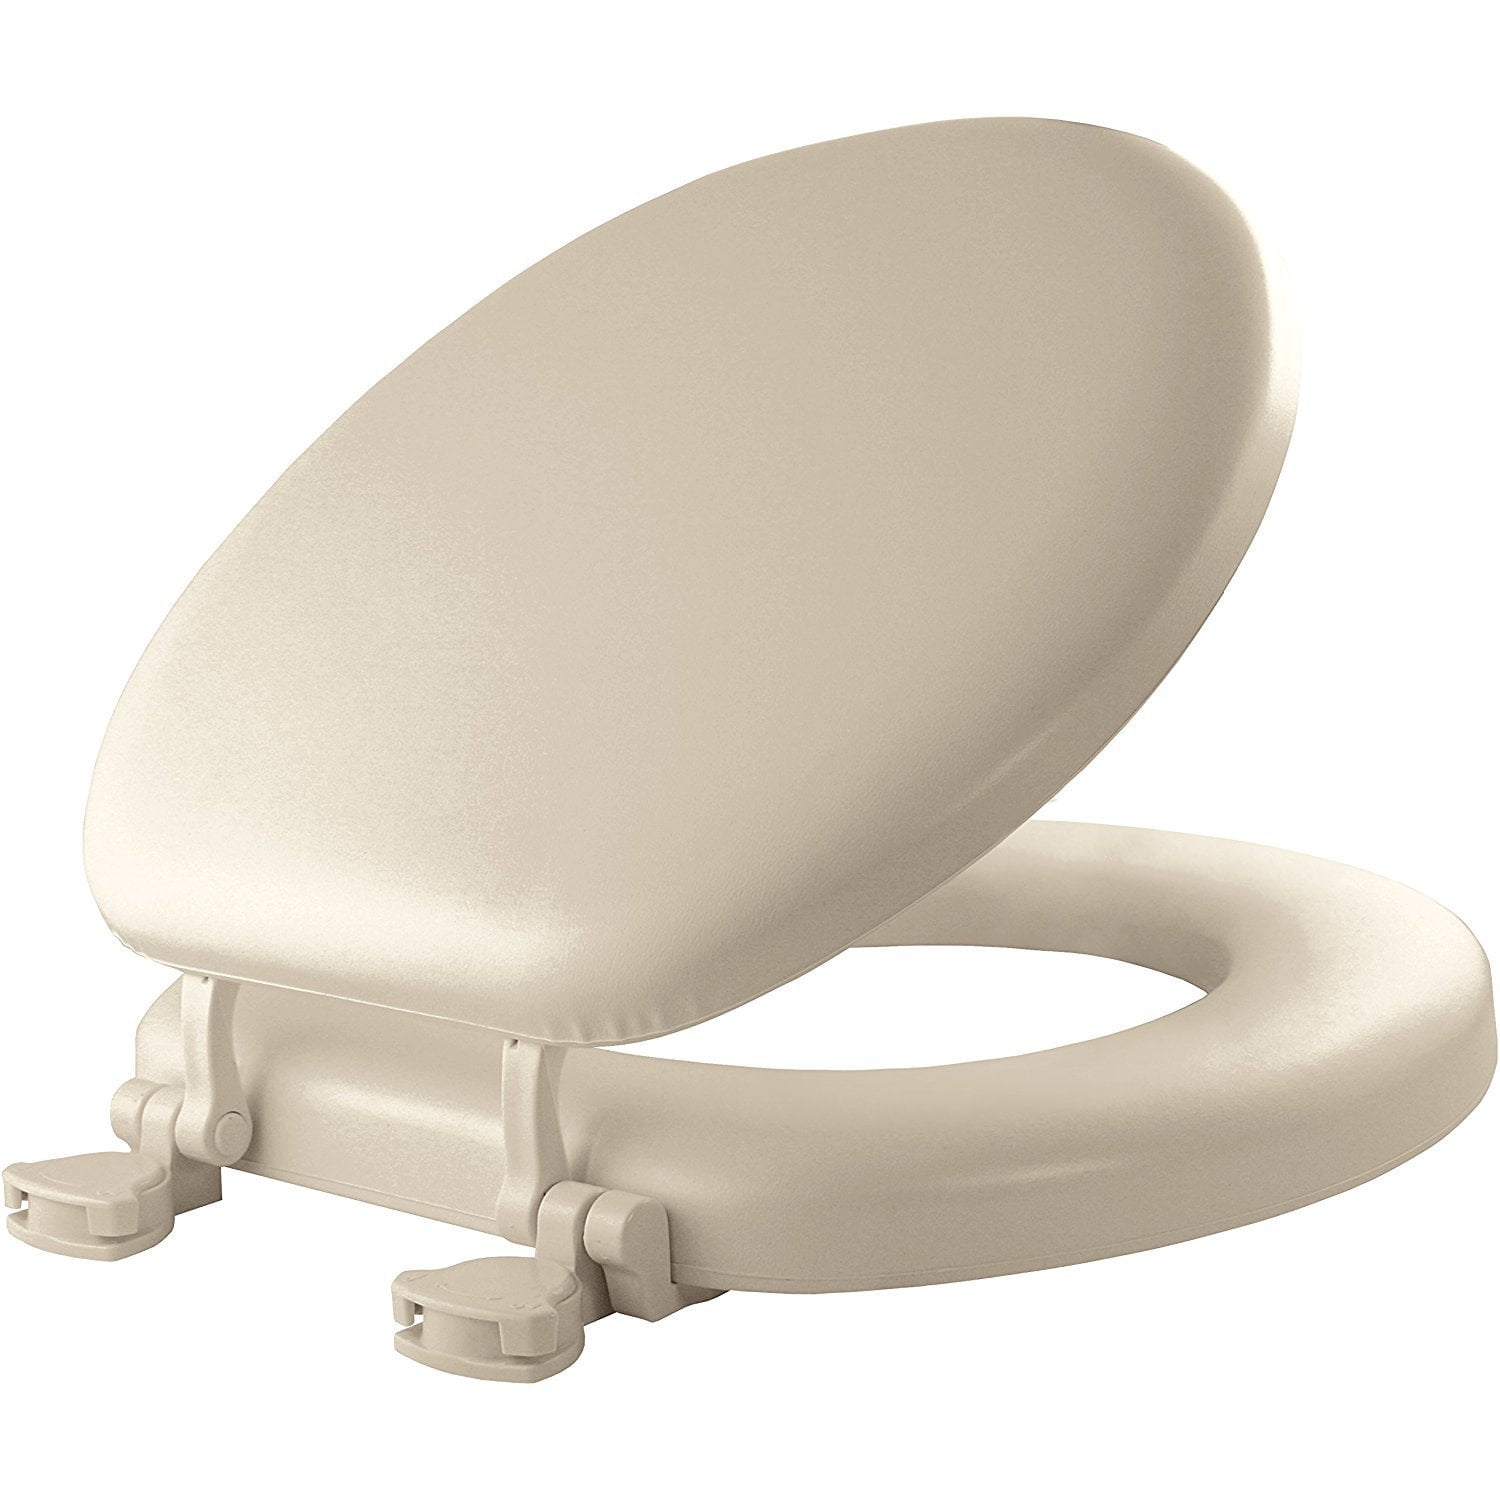 Soft Toilet Seat Easily Removes Round Padded Wood Core White Home Improvement 